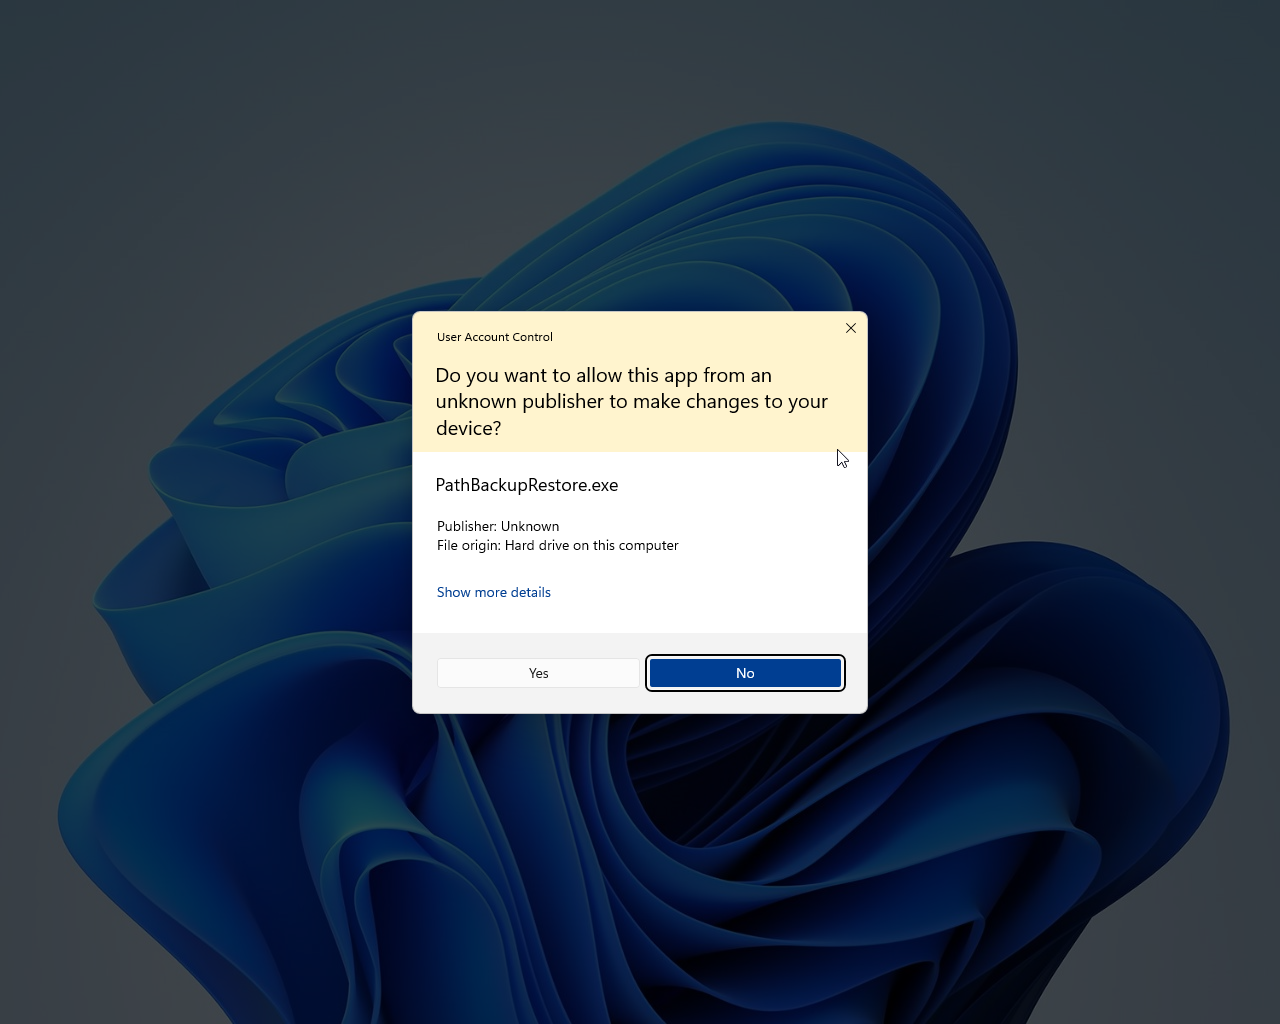 Windows prompting to run the app with Administrator privileges